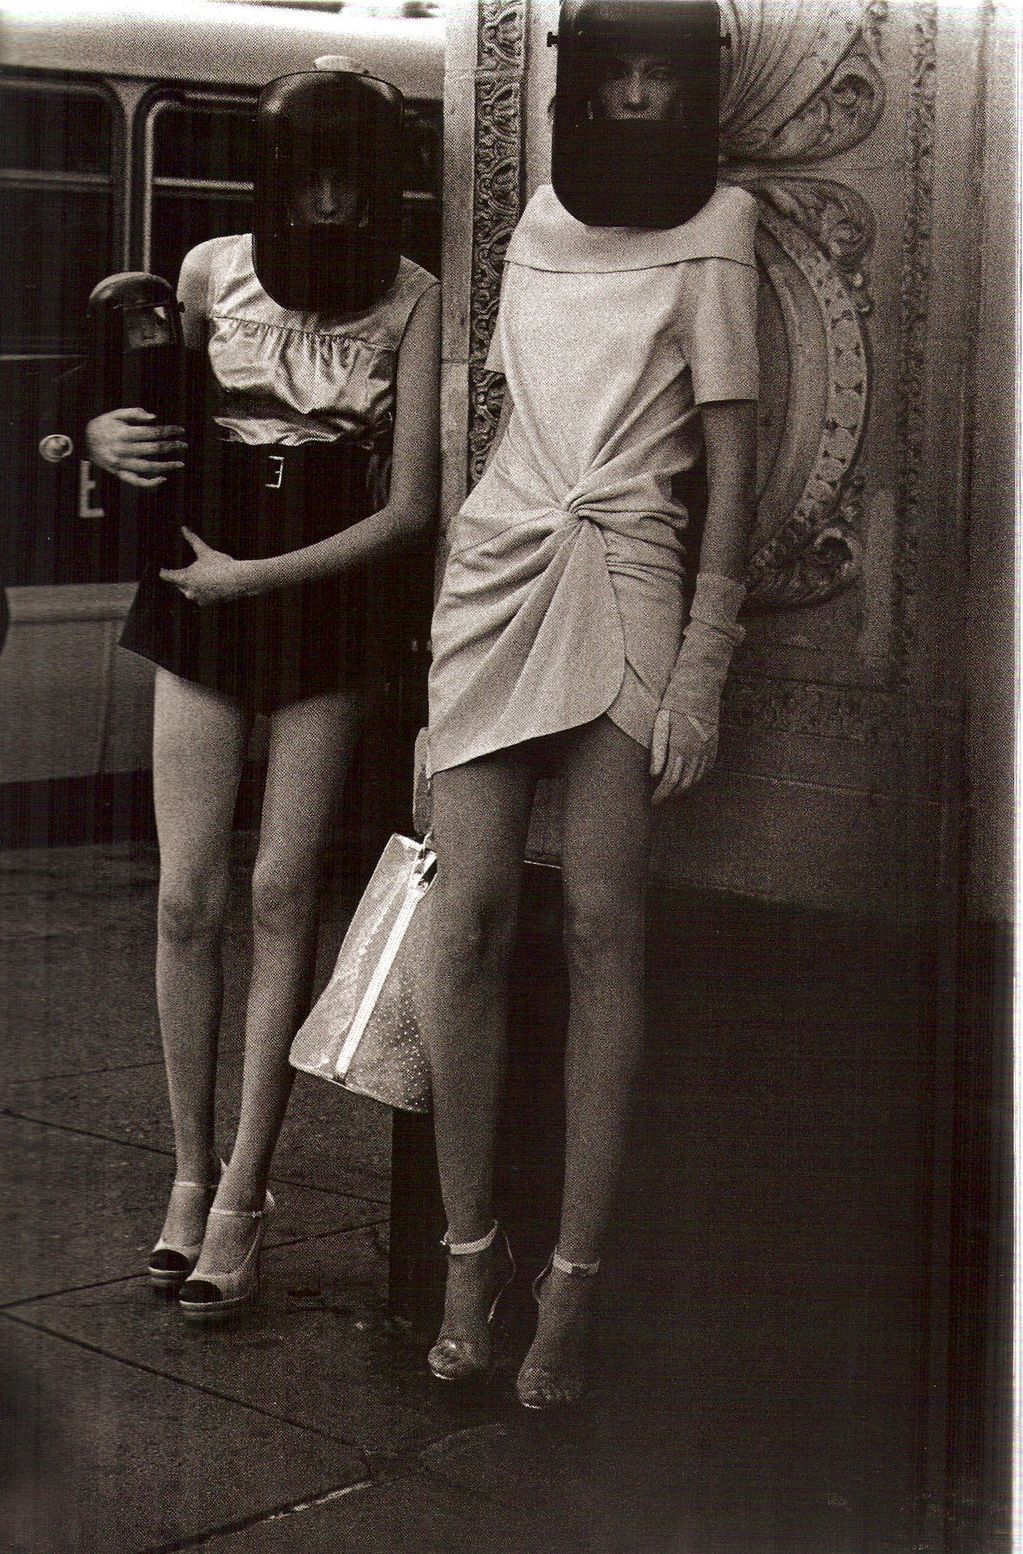 space-age-planet: “ VOGUE ITALIA (FEBRUARY 2007) “Tomorrow Vision” Photographed by Peter Lindbergh ”